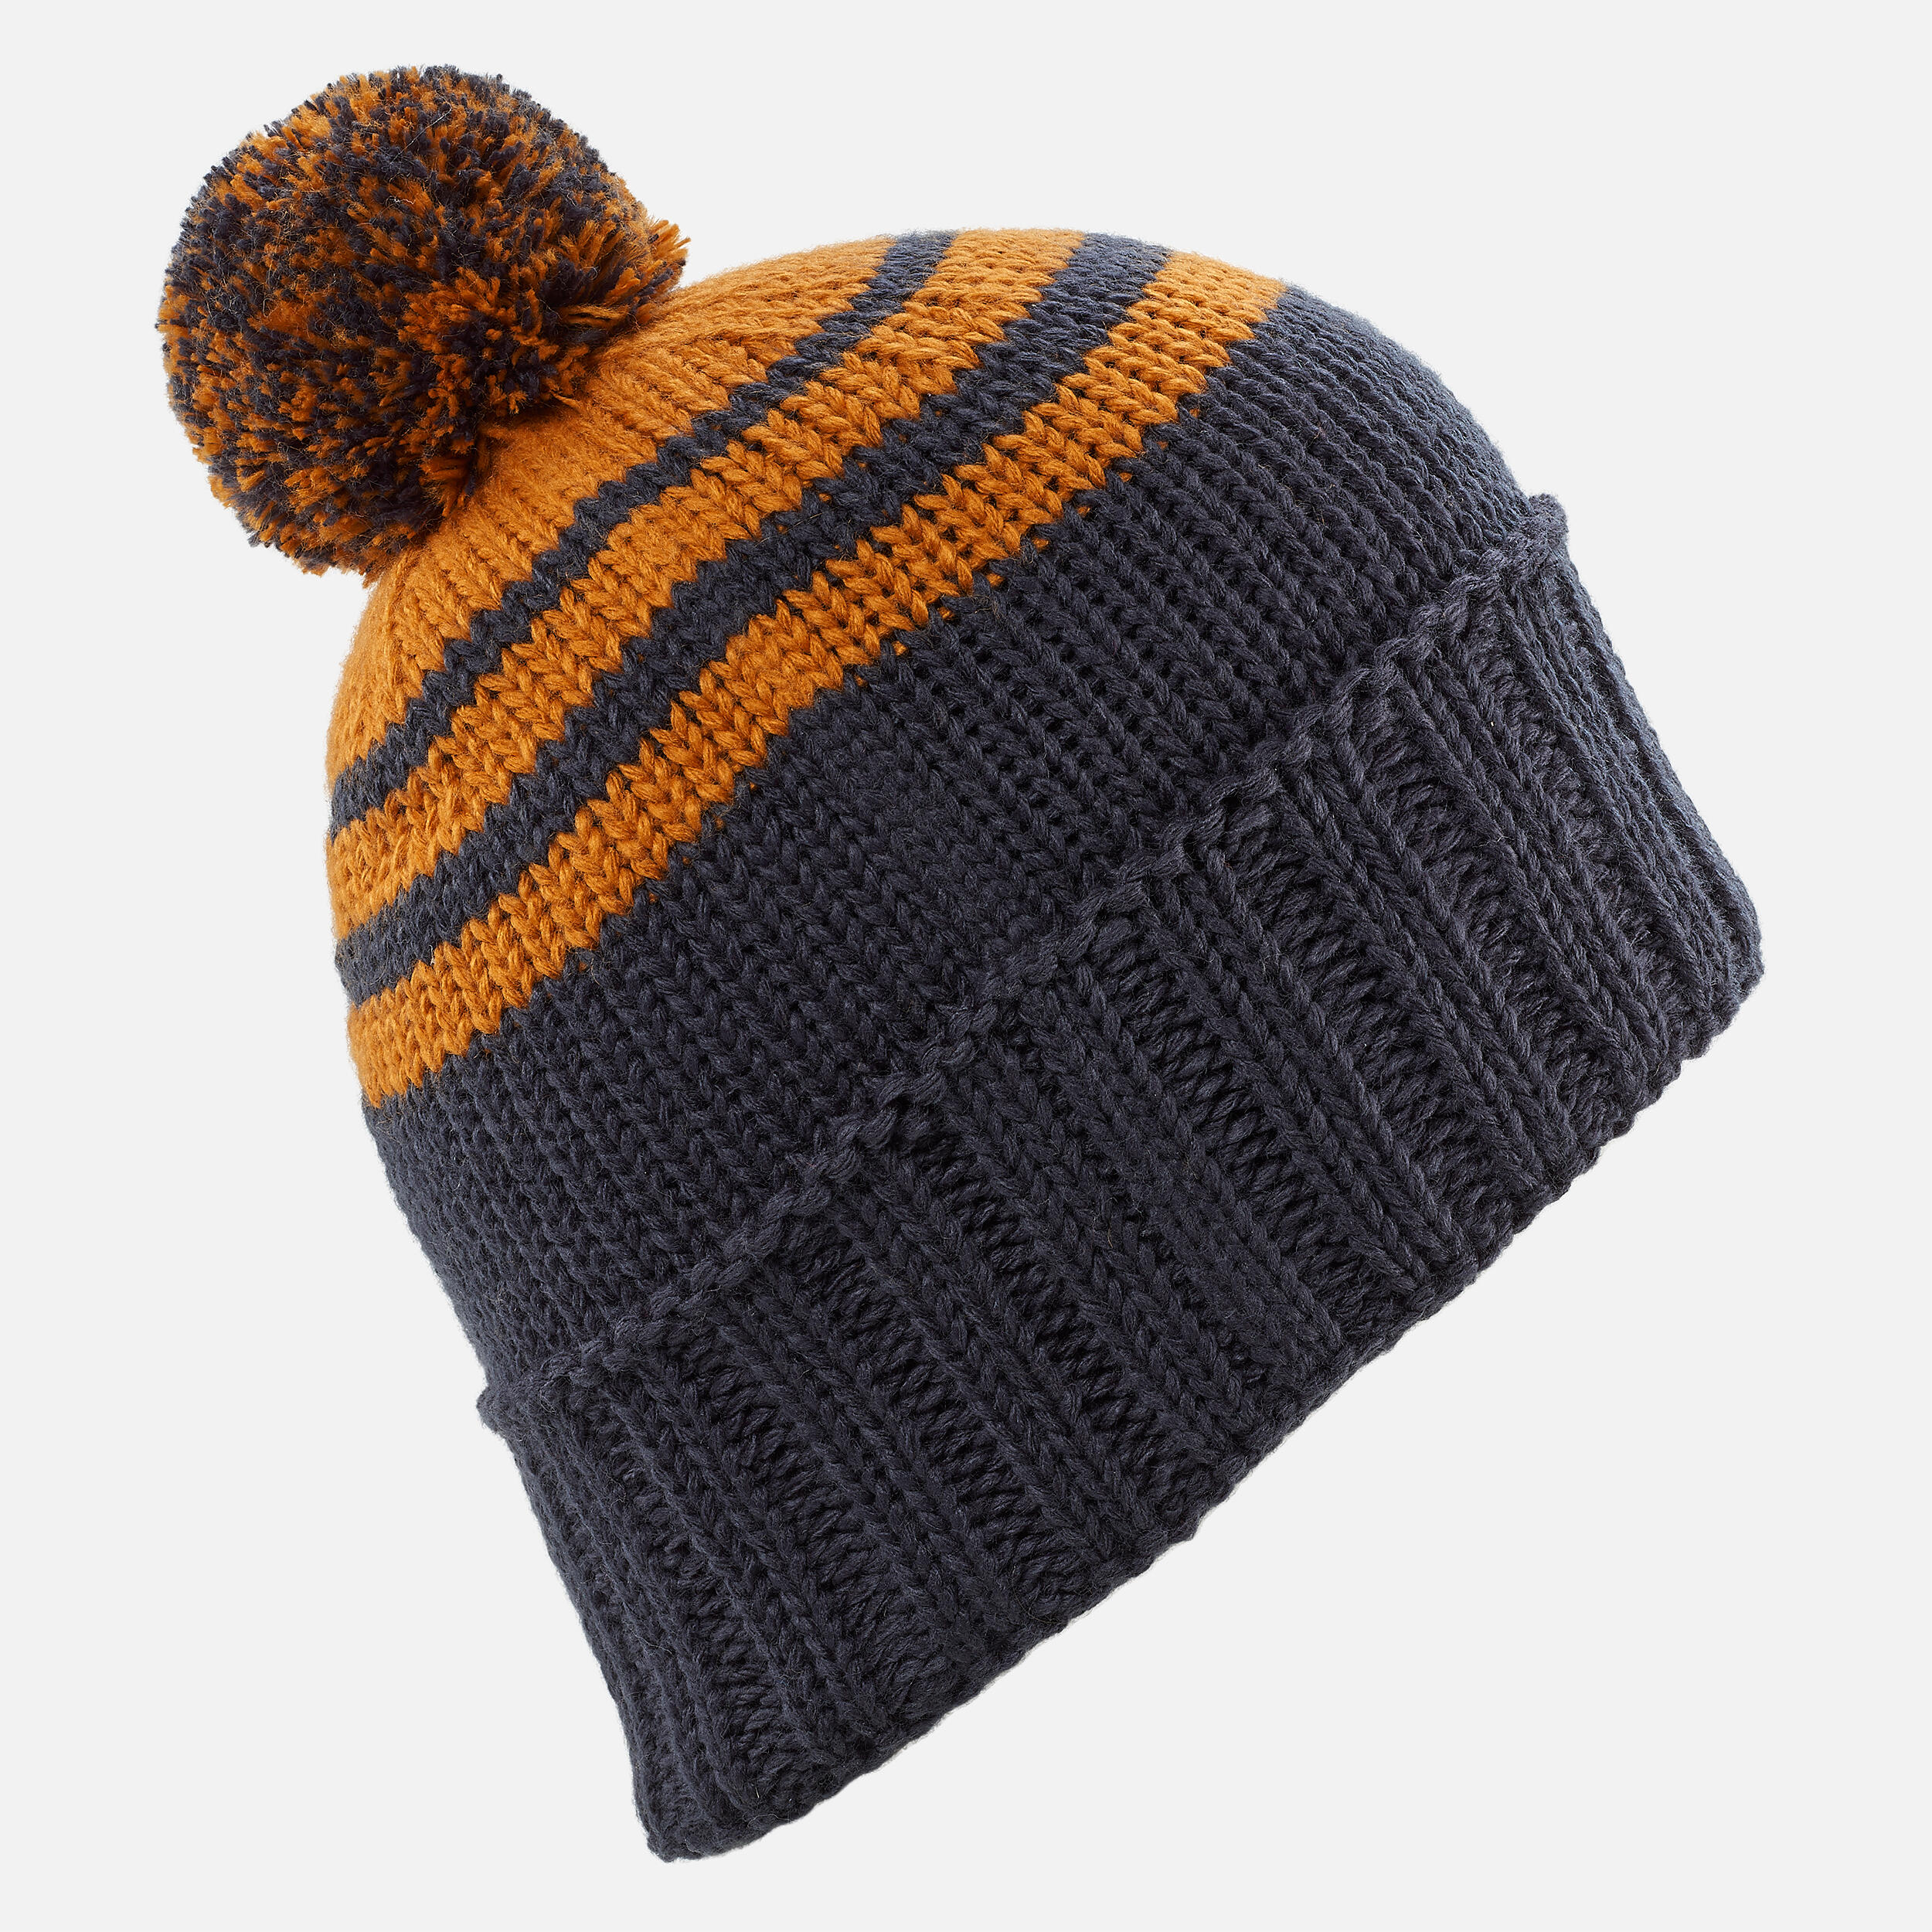 ADULT SKI HAT GRAND NORD MADE IN FRANCE - NAVY BLUE-OCHRE 6/8